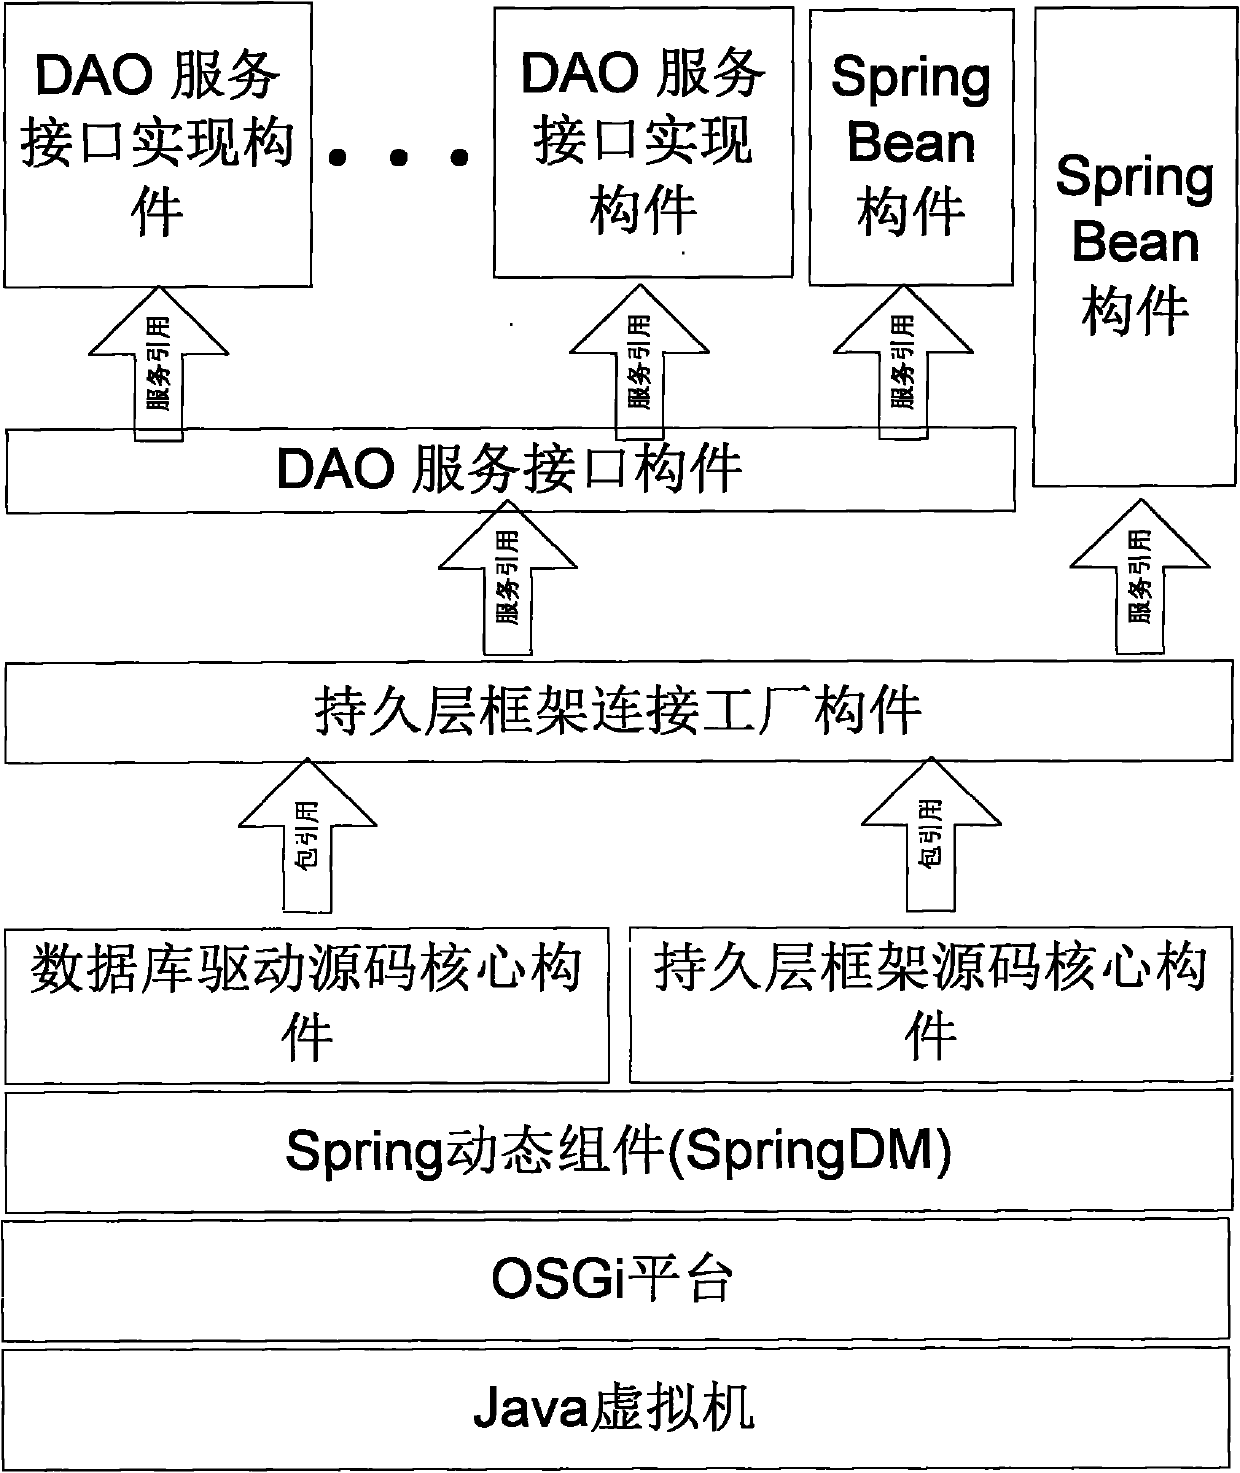 Dynamic model based on SpringDM and application thereof to persistence layer of RFID (Radio Frequency Identification) middleware